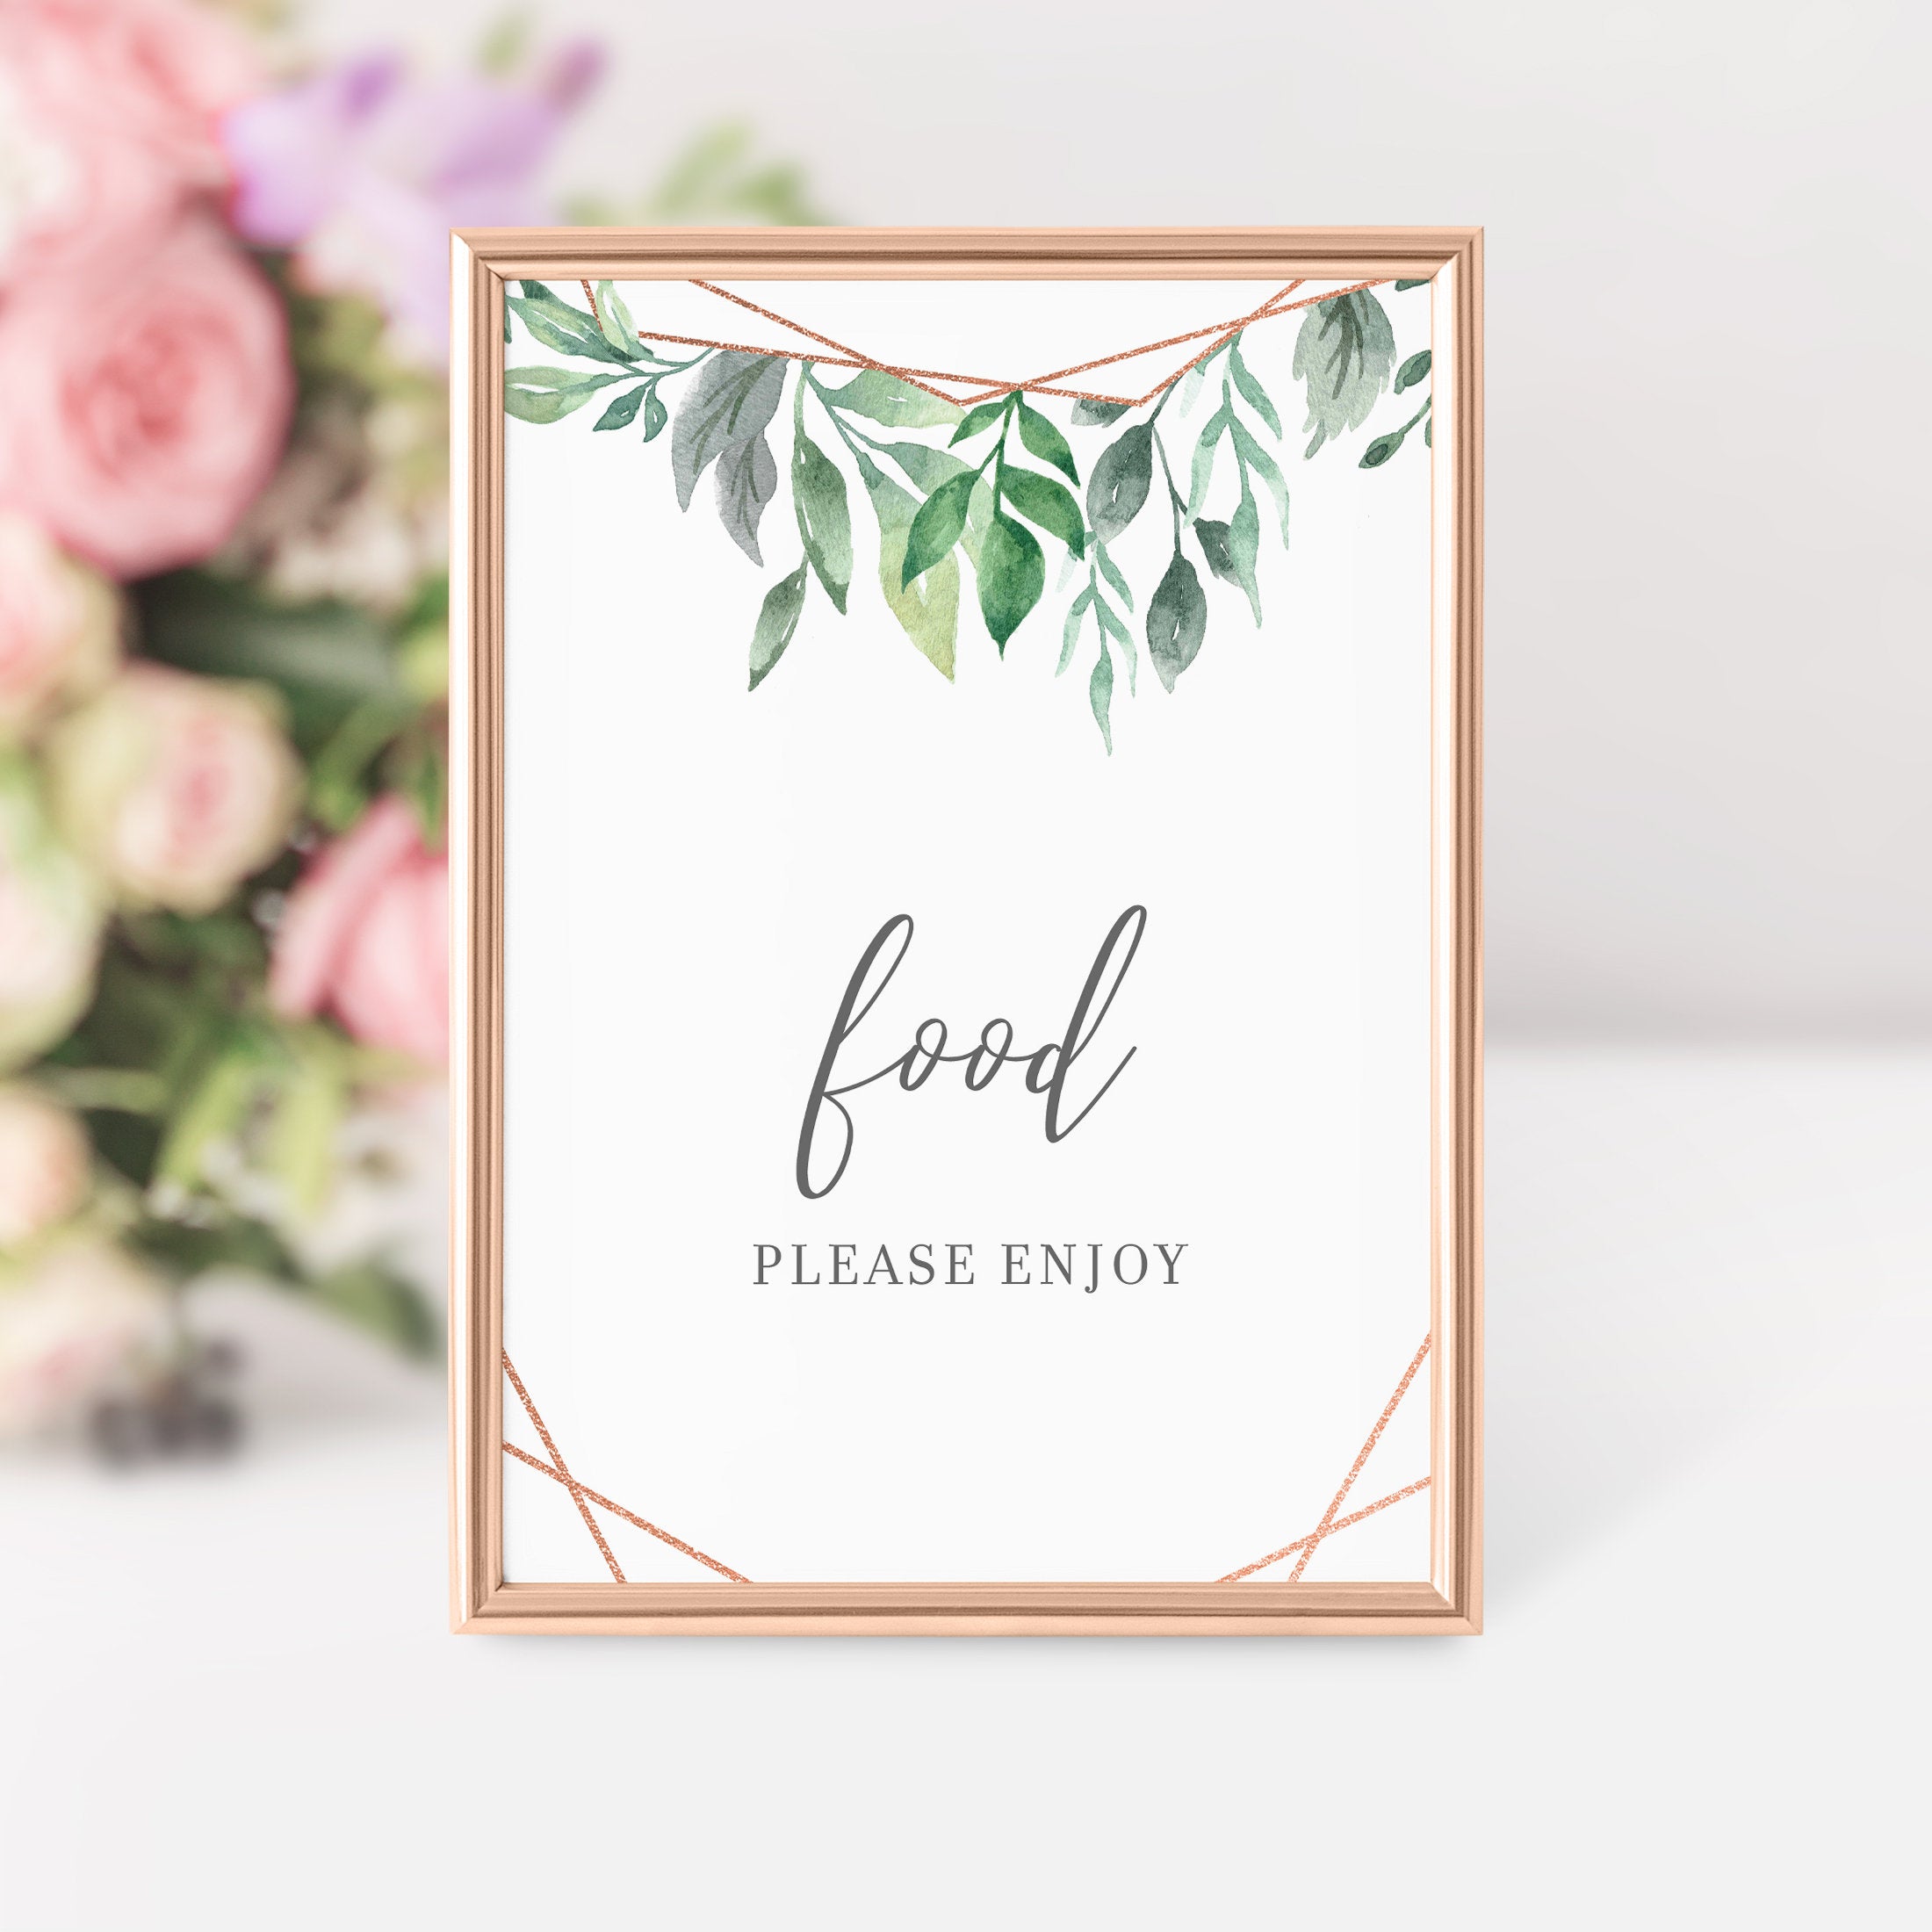 Geometric Rose Gold Greenery Printable Food Sign INSTANT DOWNLOAD, Bridal Shower, Baby Shower, Wedding Decorations and Supplies - GFRG100 - @PlumPolkaDot 